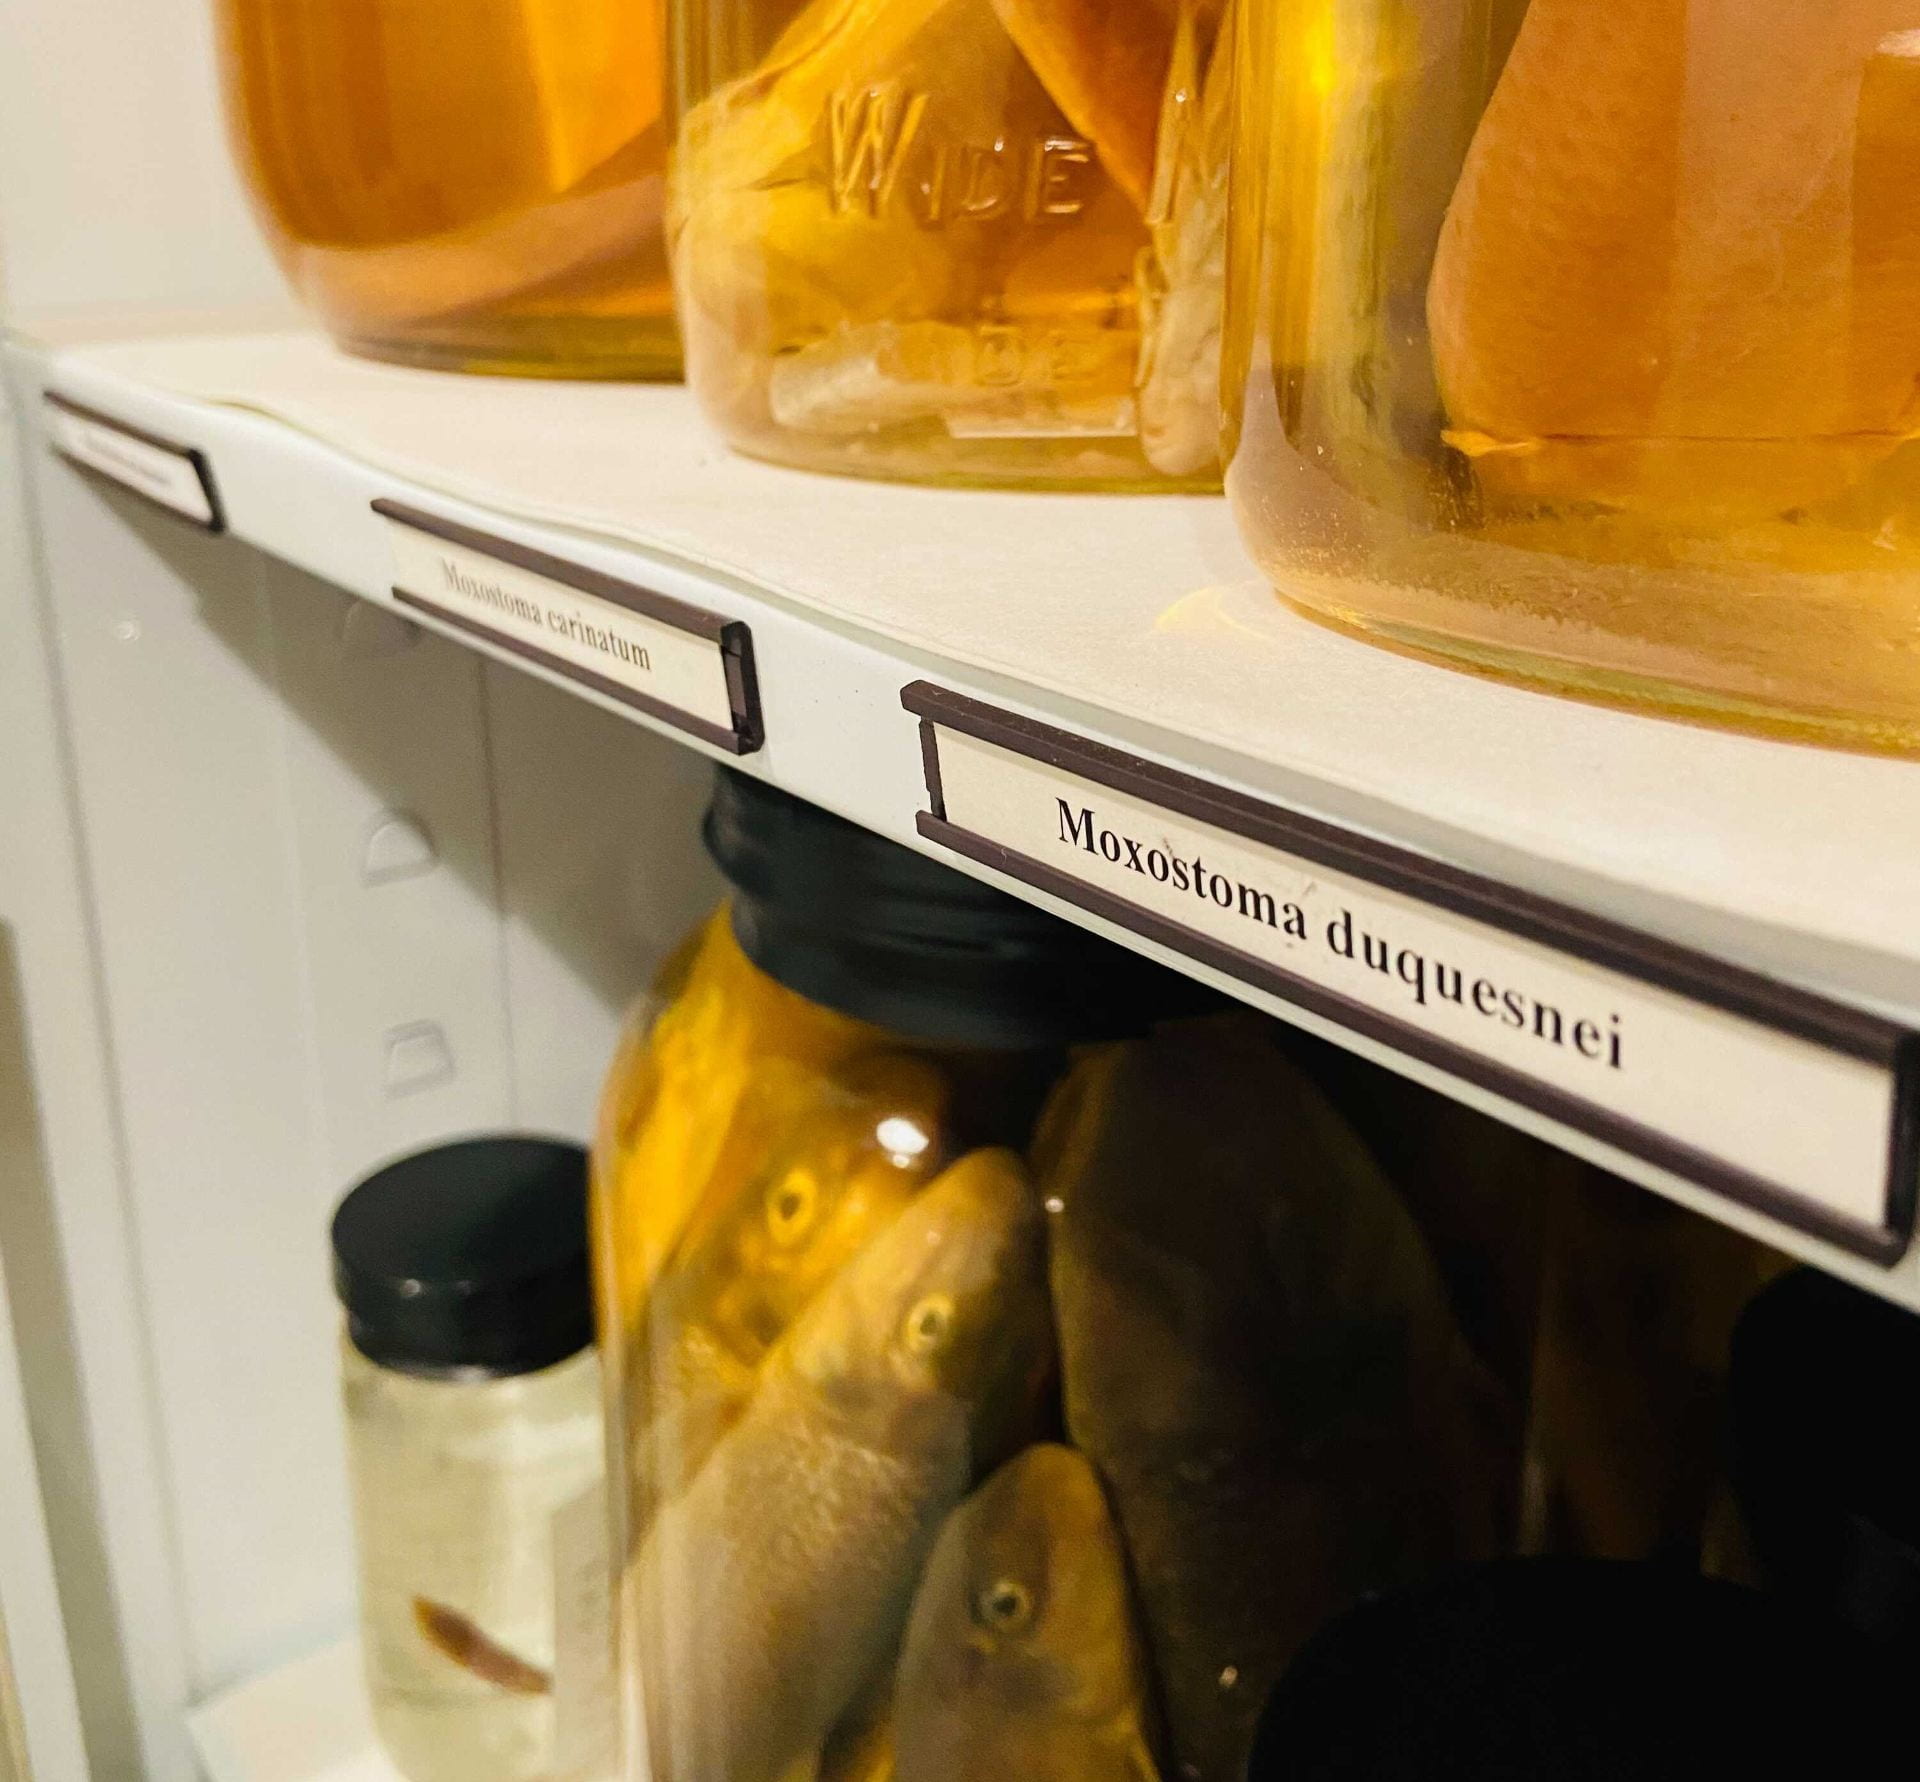 Jars with Ichthyology